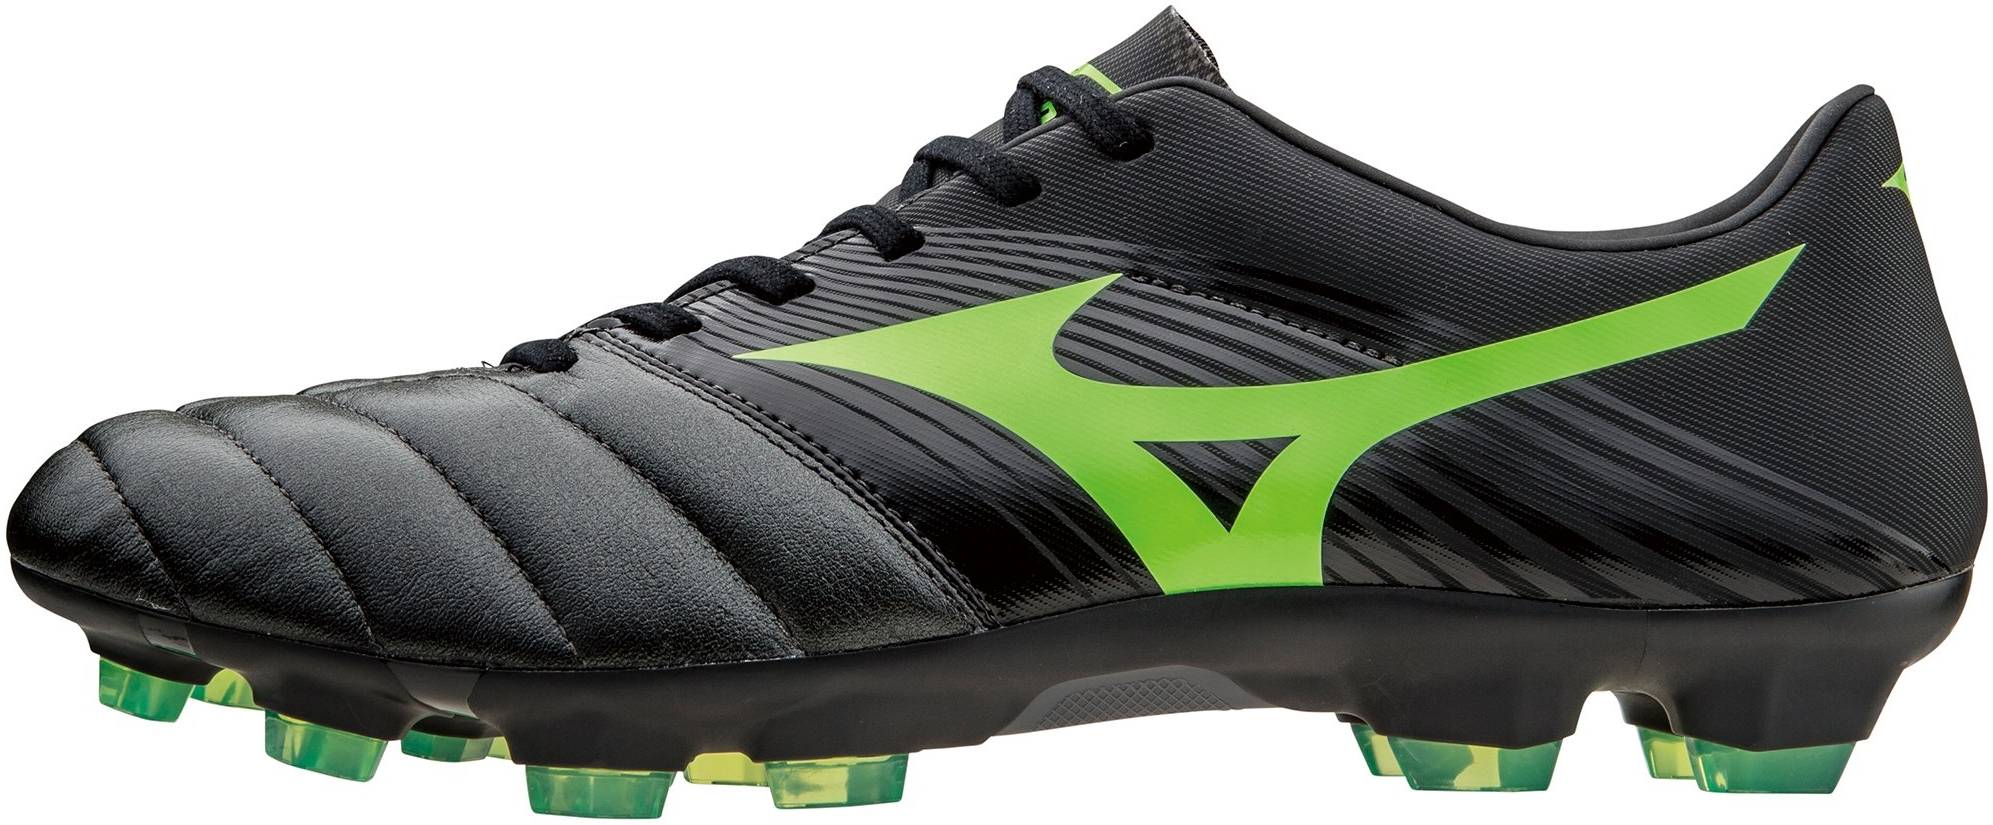 Save 13% on Mizuno Soccer Cleats (12 